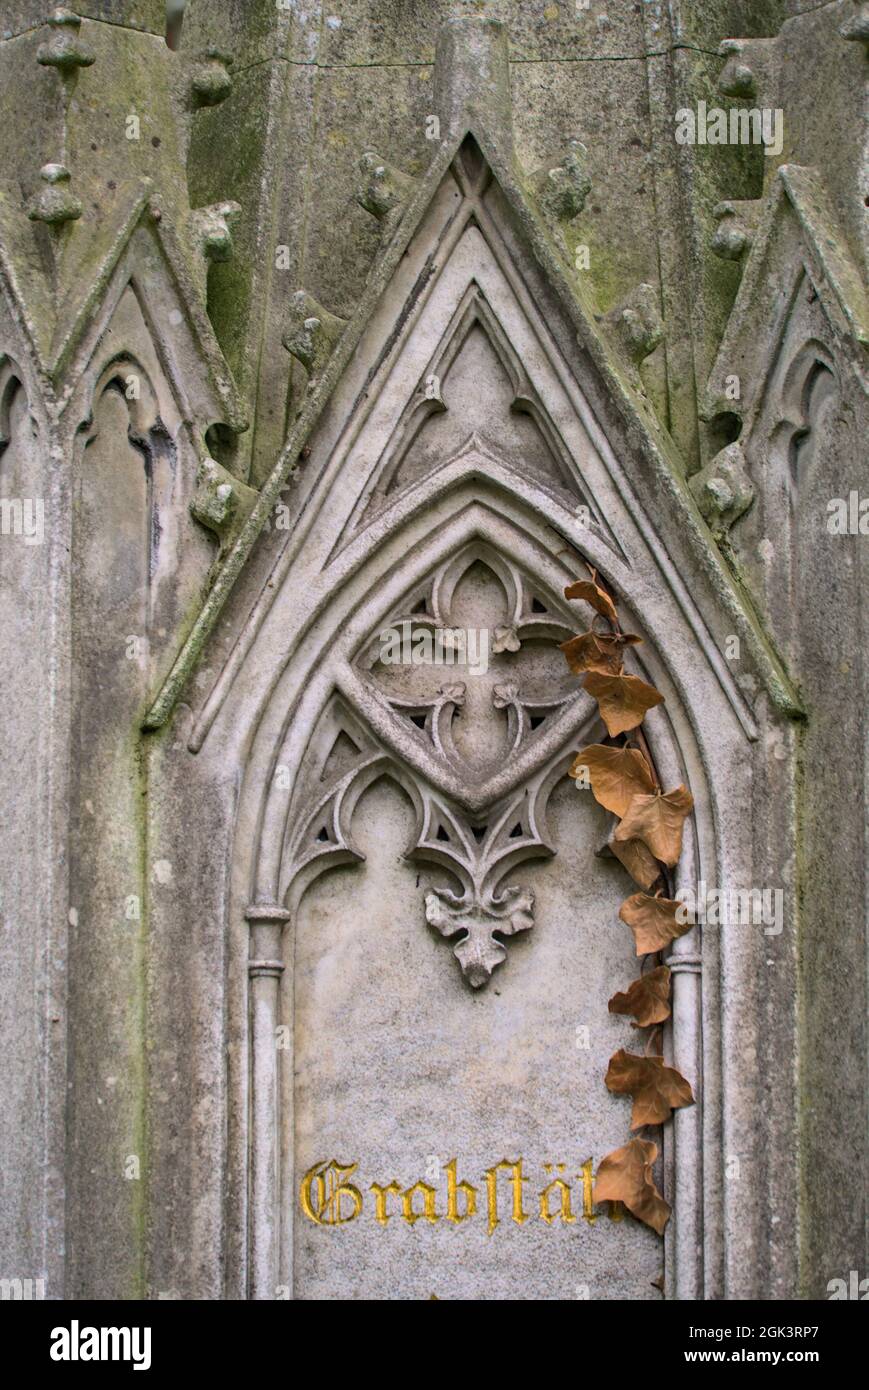 Vertical shot of a part of a weathered ornamental stone sculpture in a cemetery Stock Photo